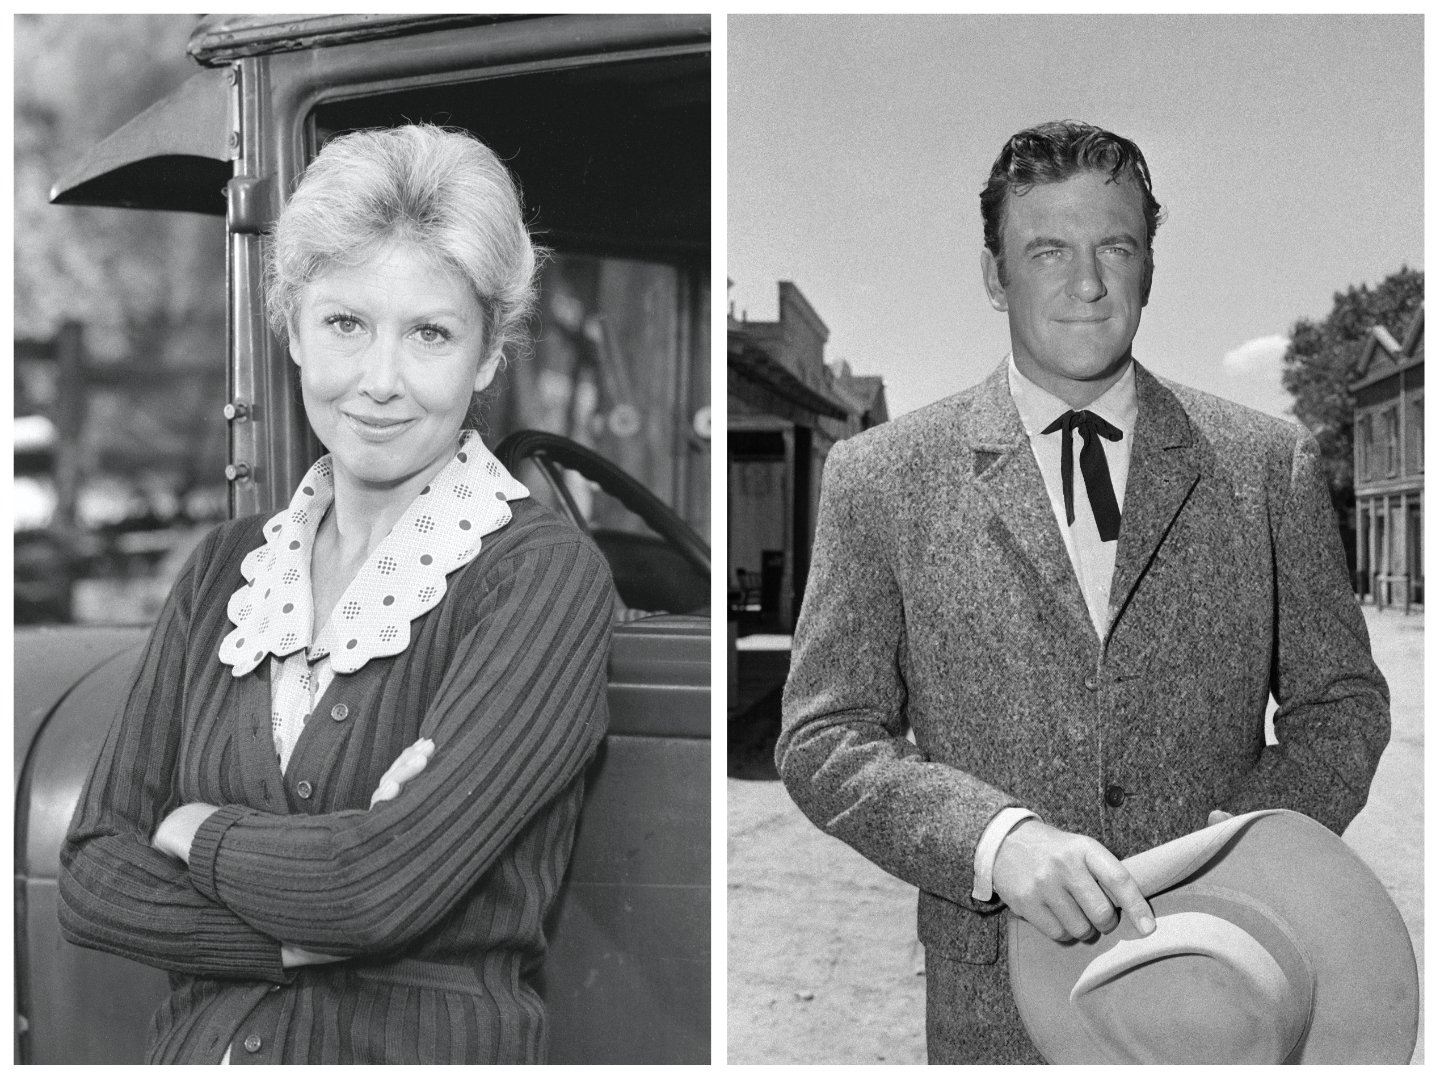 Black and white side-by-side photos of Michael Learned as Olivia Walton on 'The Waltons' and James Arness as Matt Dillon on 'Gunsmoke'